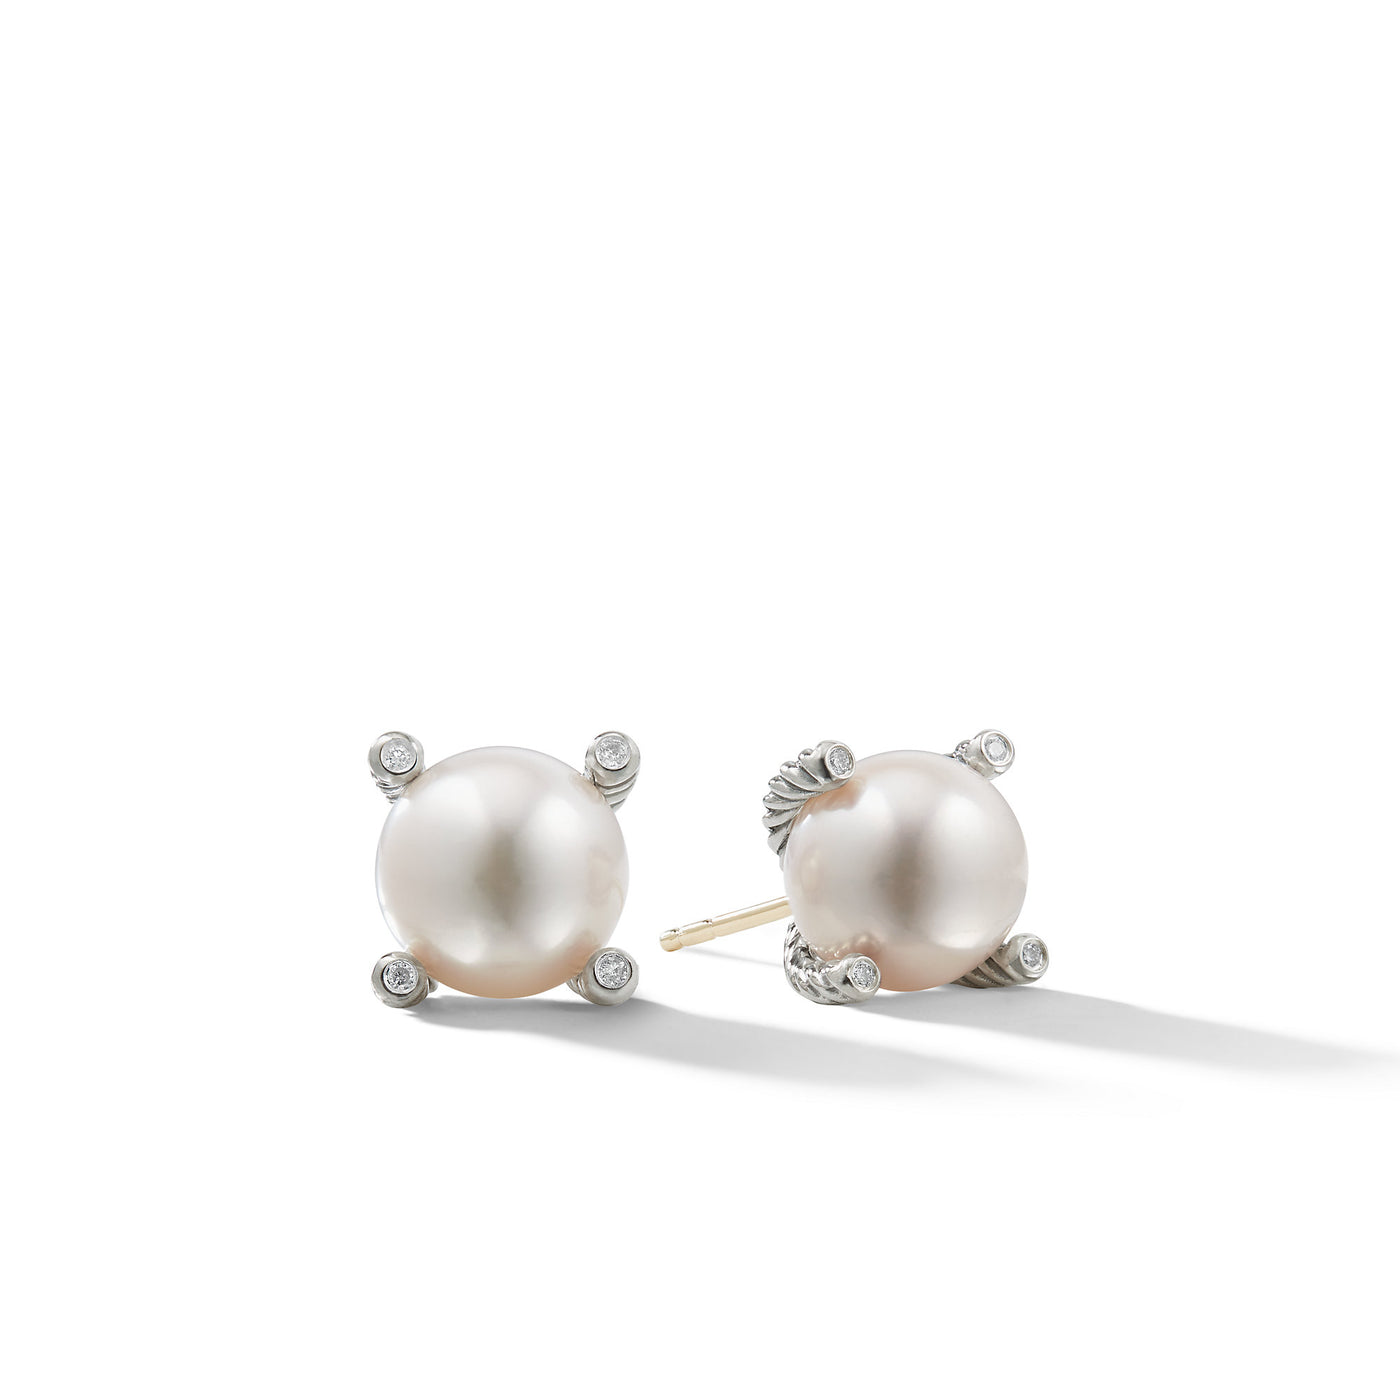 Pearl Stud Earrings in Sterling Silver with Pearls and Diamonds\, 14mm